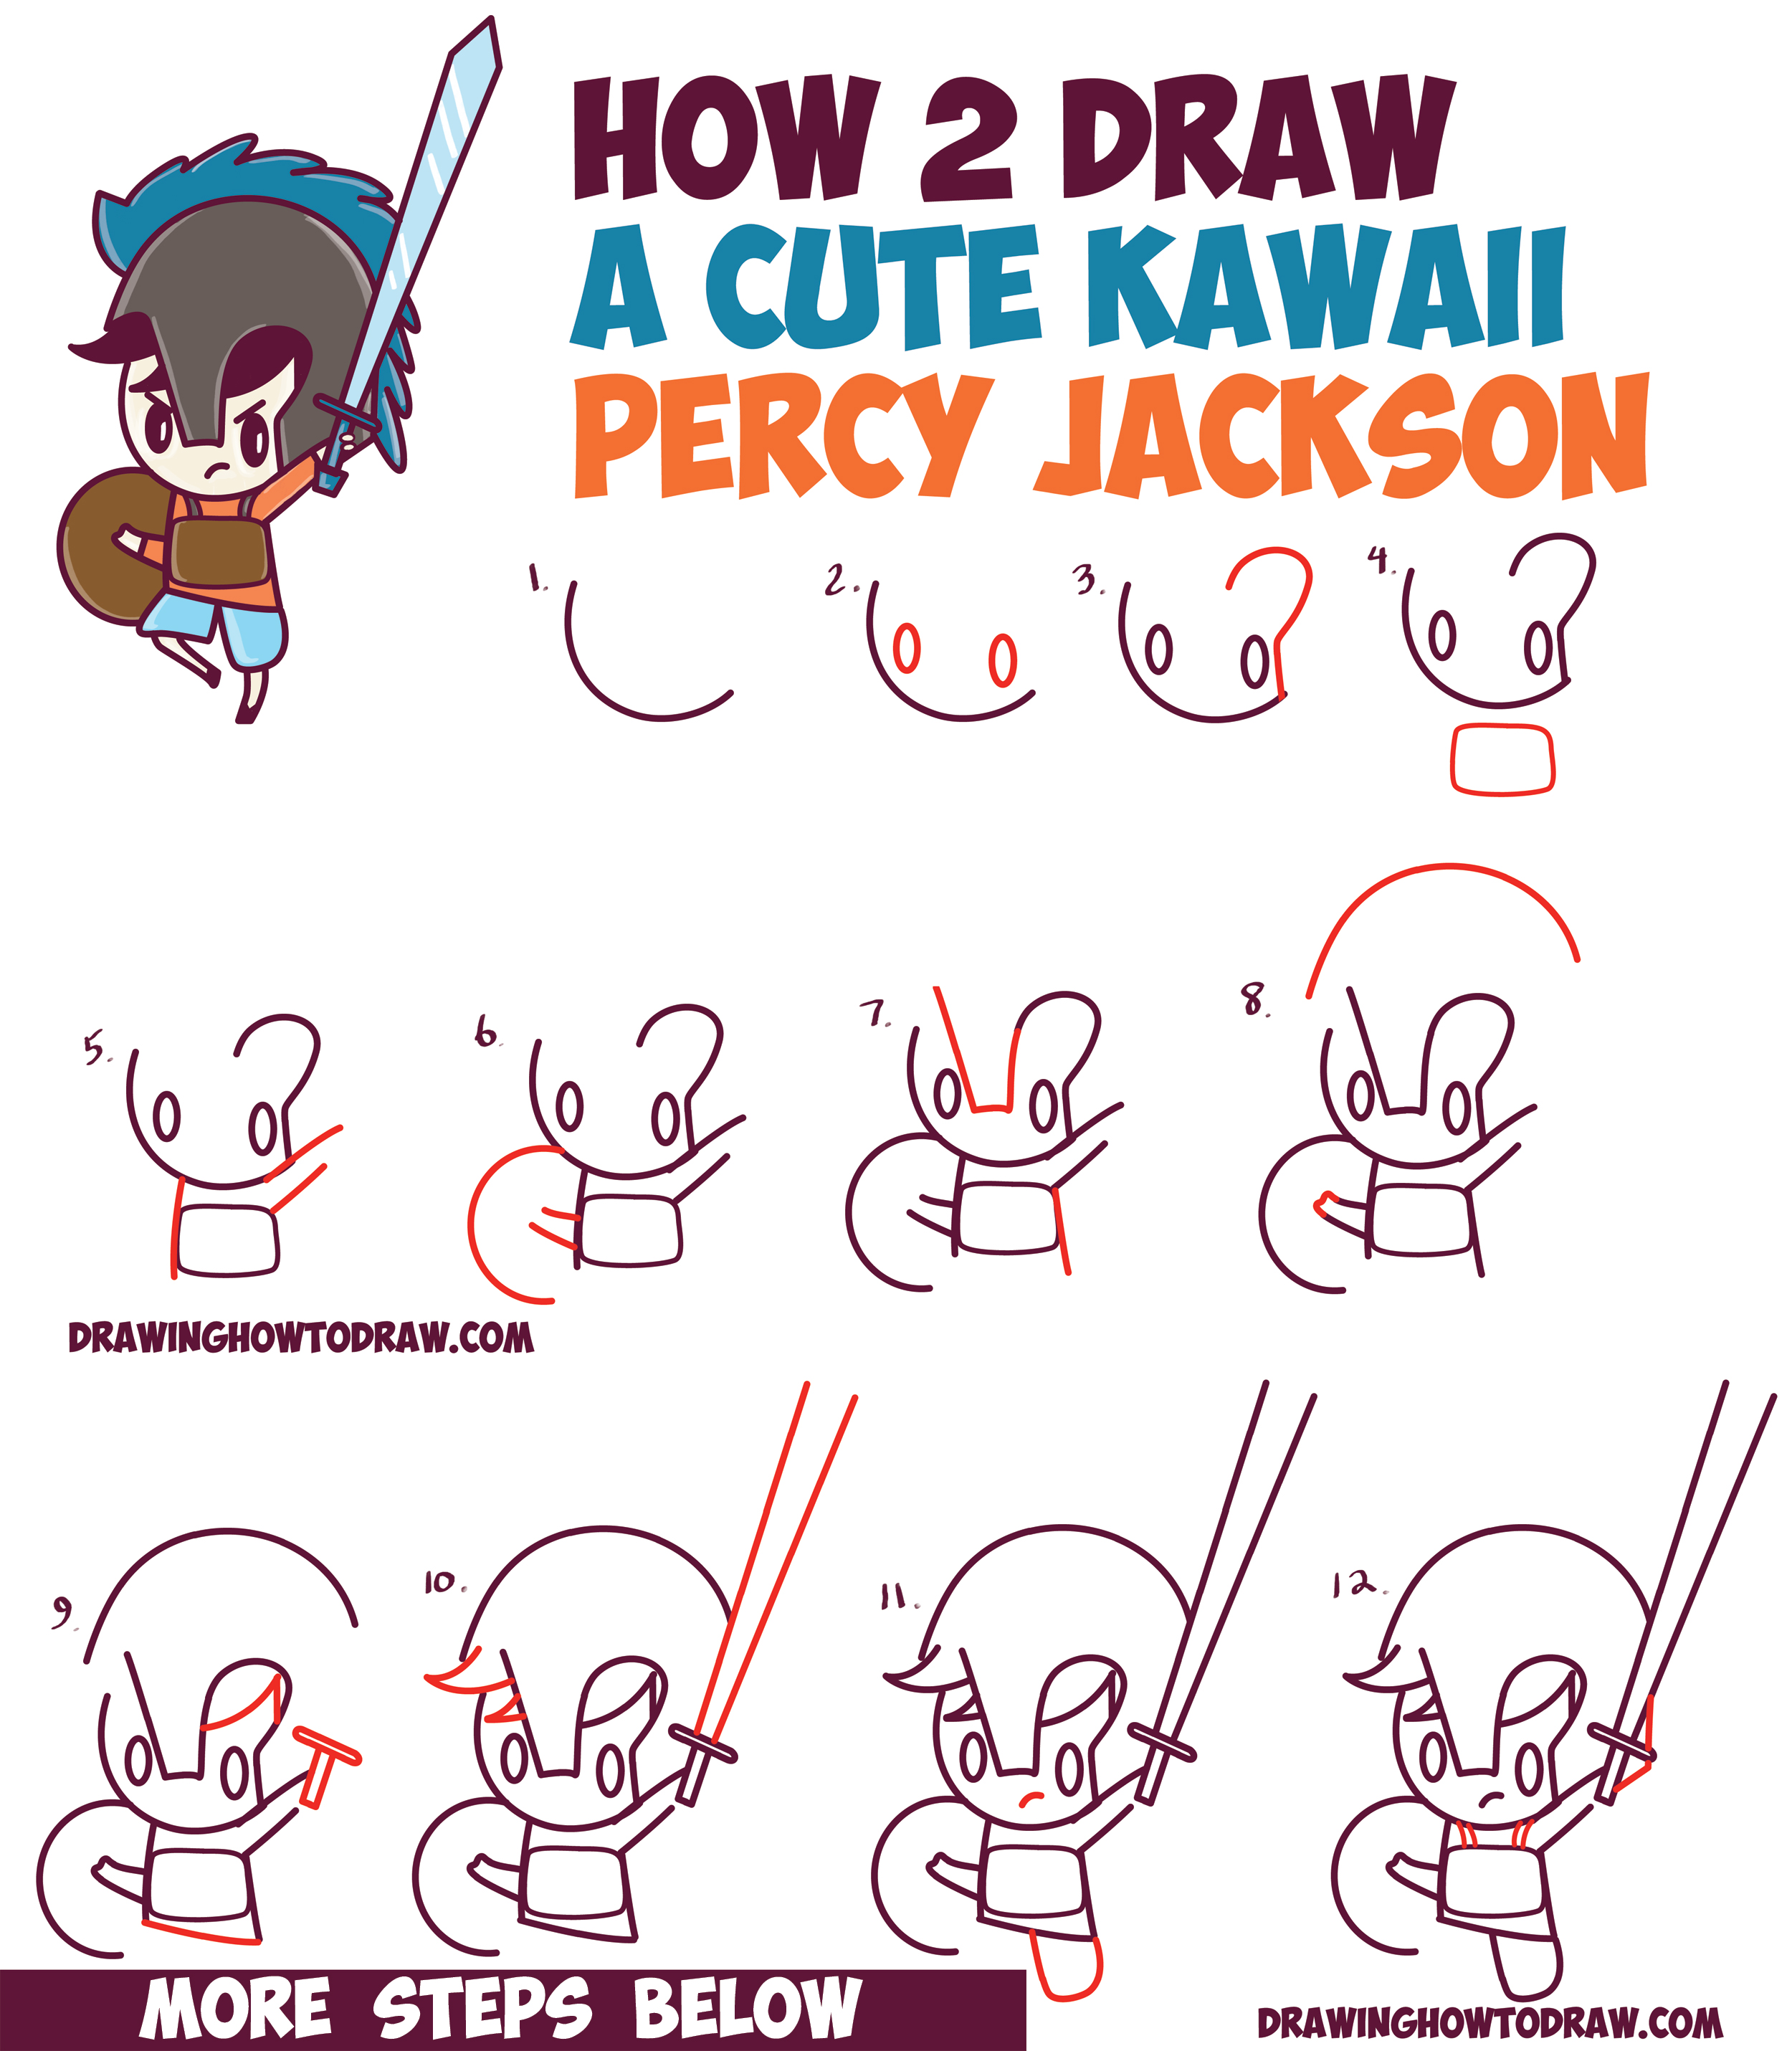 How to Draw Percy Jackson (Cute / Cartoon / Chibi / Kawaii Style) in Easy Step by Step Drawing Tutorial for Kids